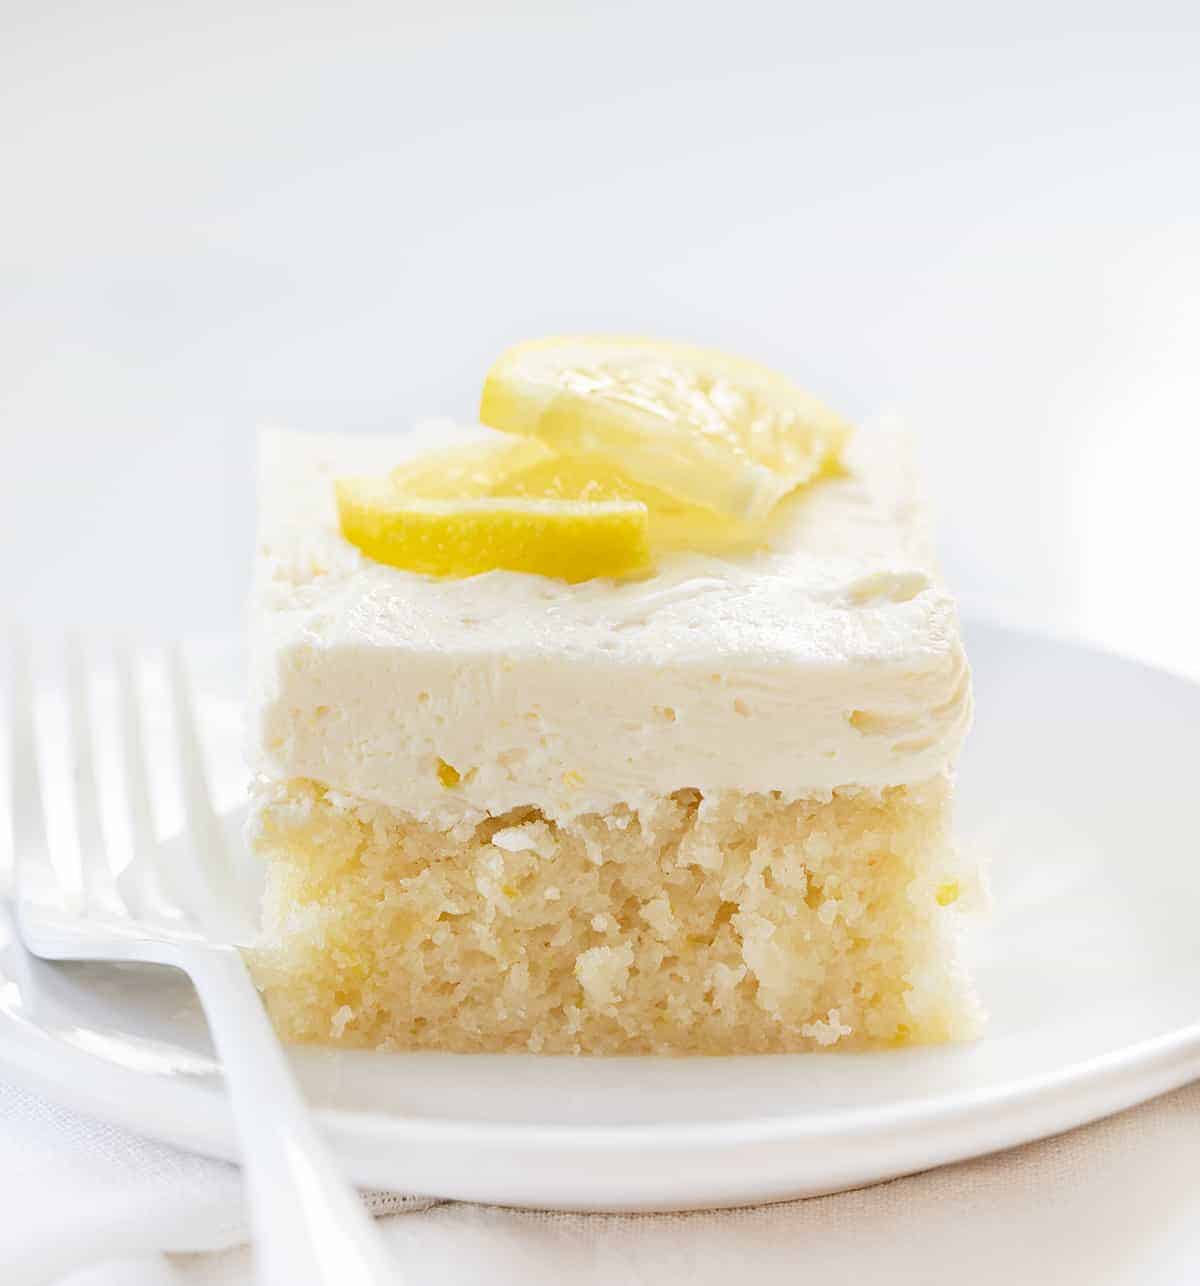 One Piece of Lemon Crazy Cake on a White Plate with White Fork.